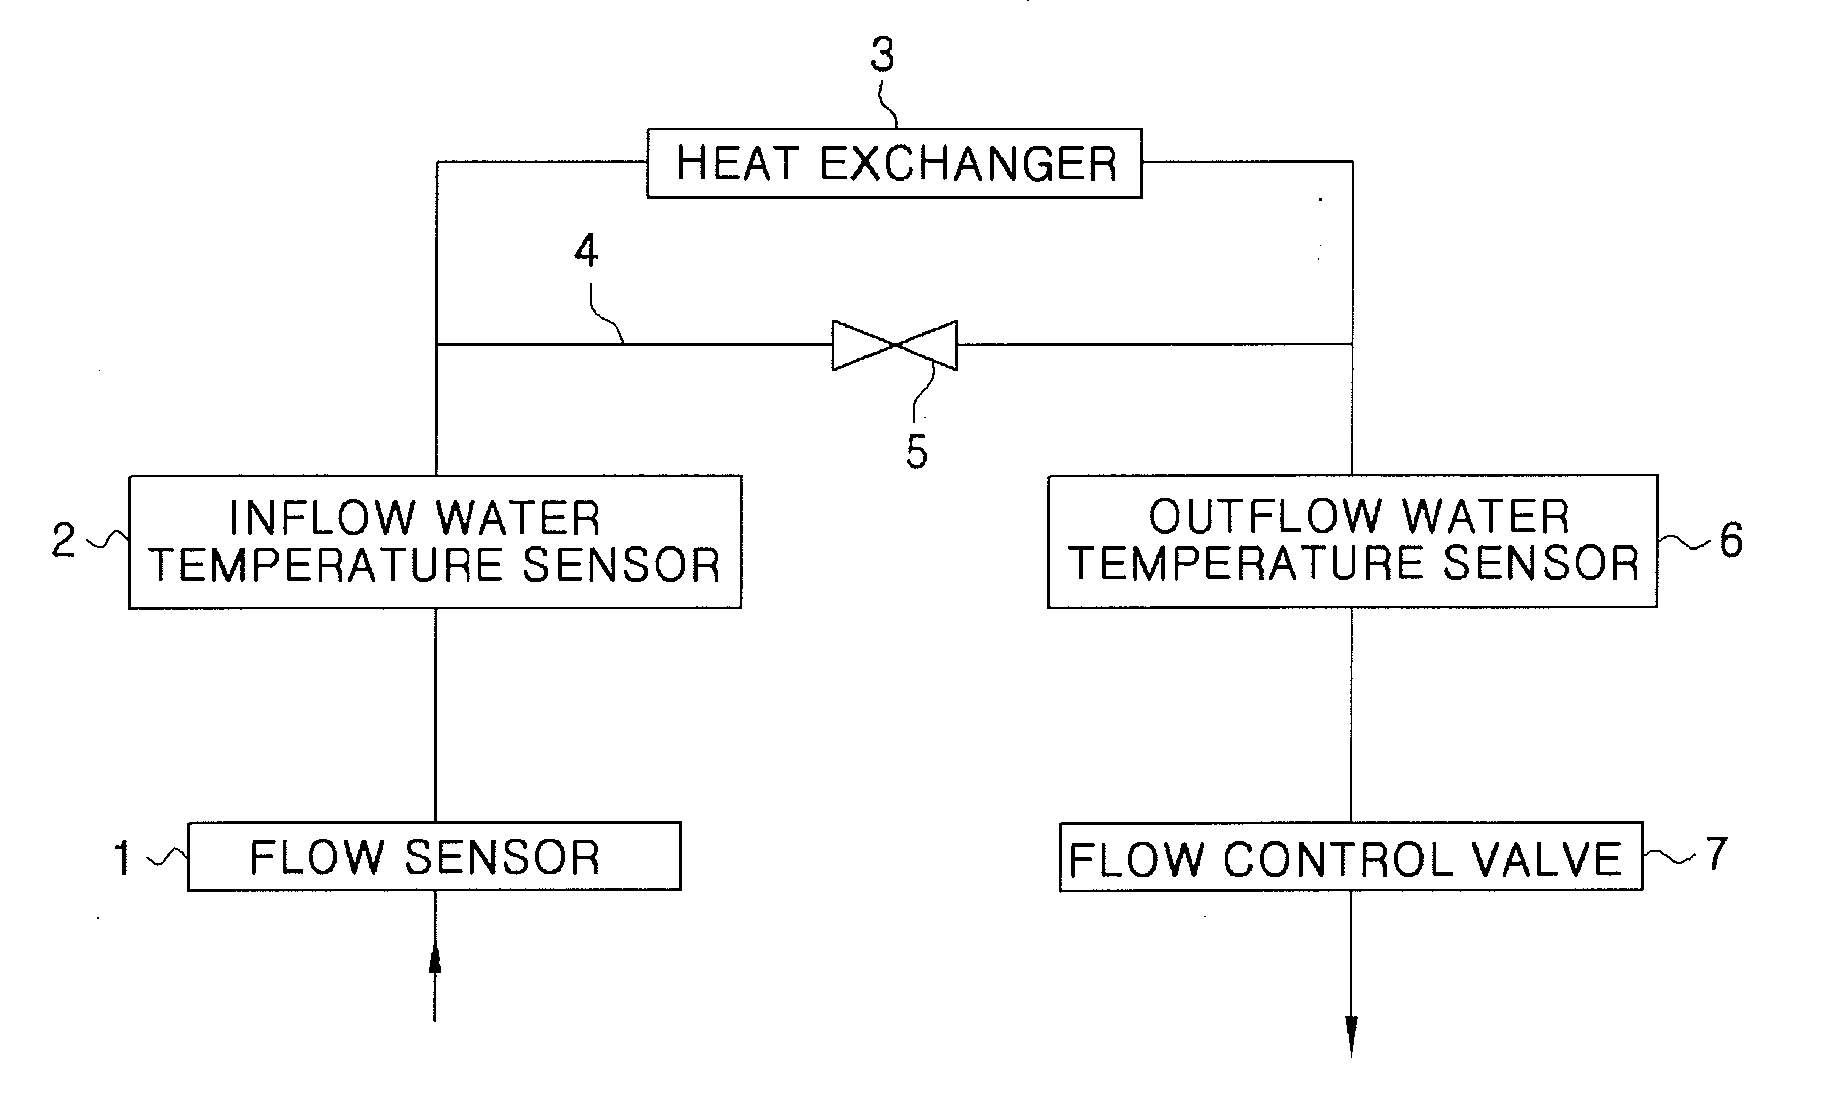 Hot water supply system for constantly maintaining temperature of hot water